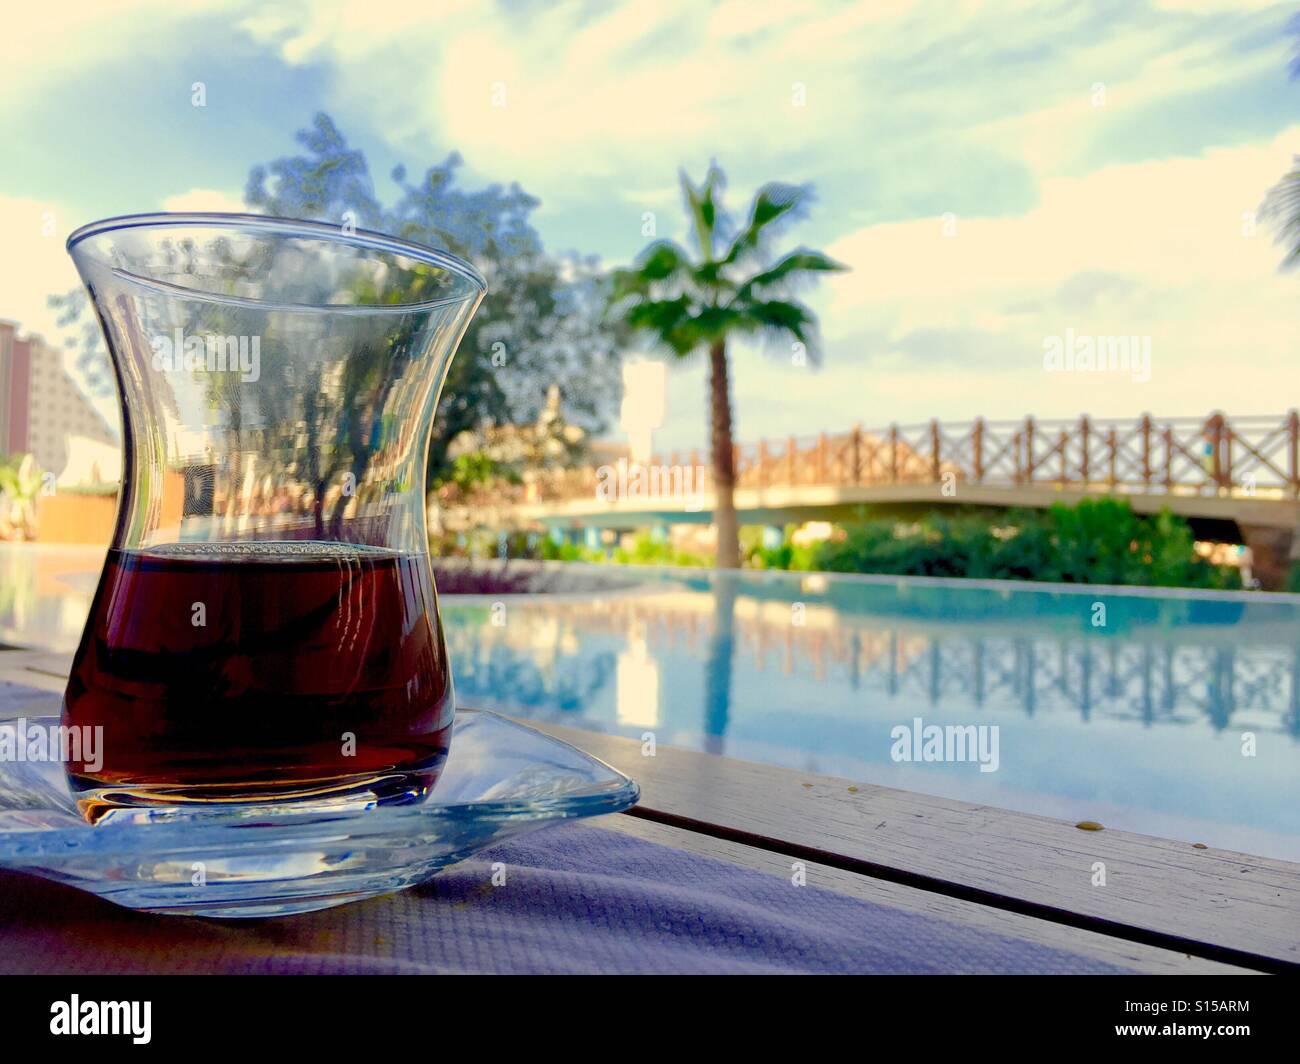 Morning Turkish Tea by the Pool Stock Photo